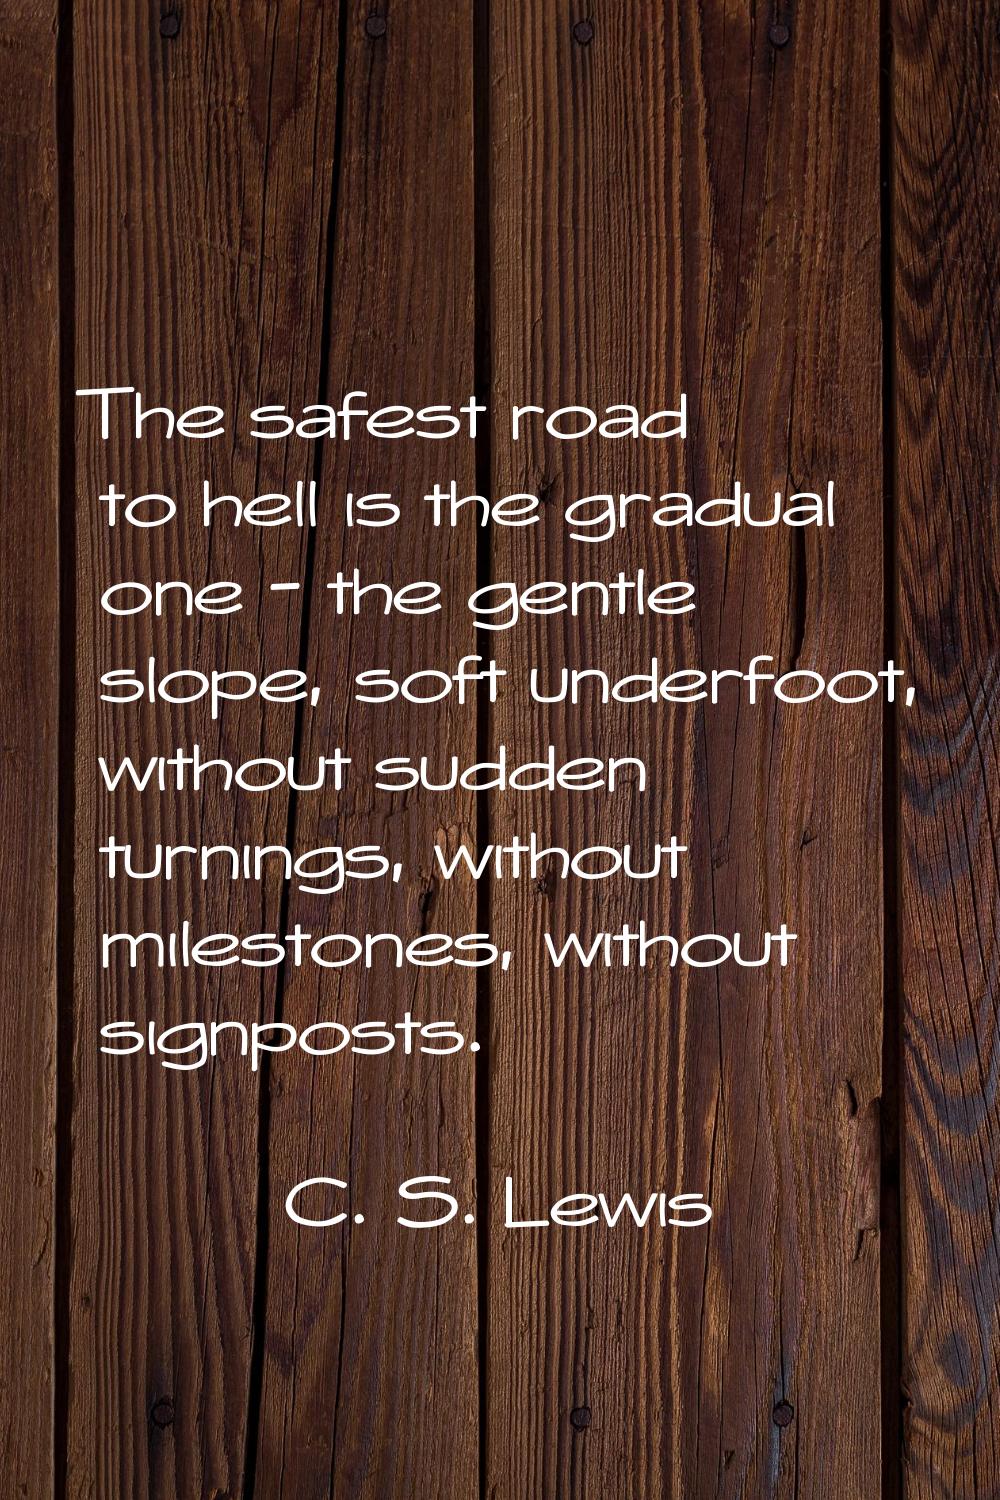 The safest road to hell is the gradual one - the gentle slope, soft underfoot, without sudden turni